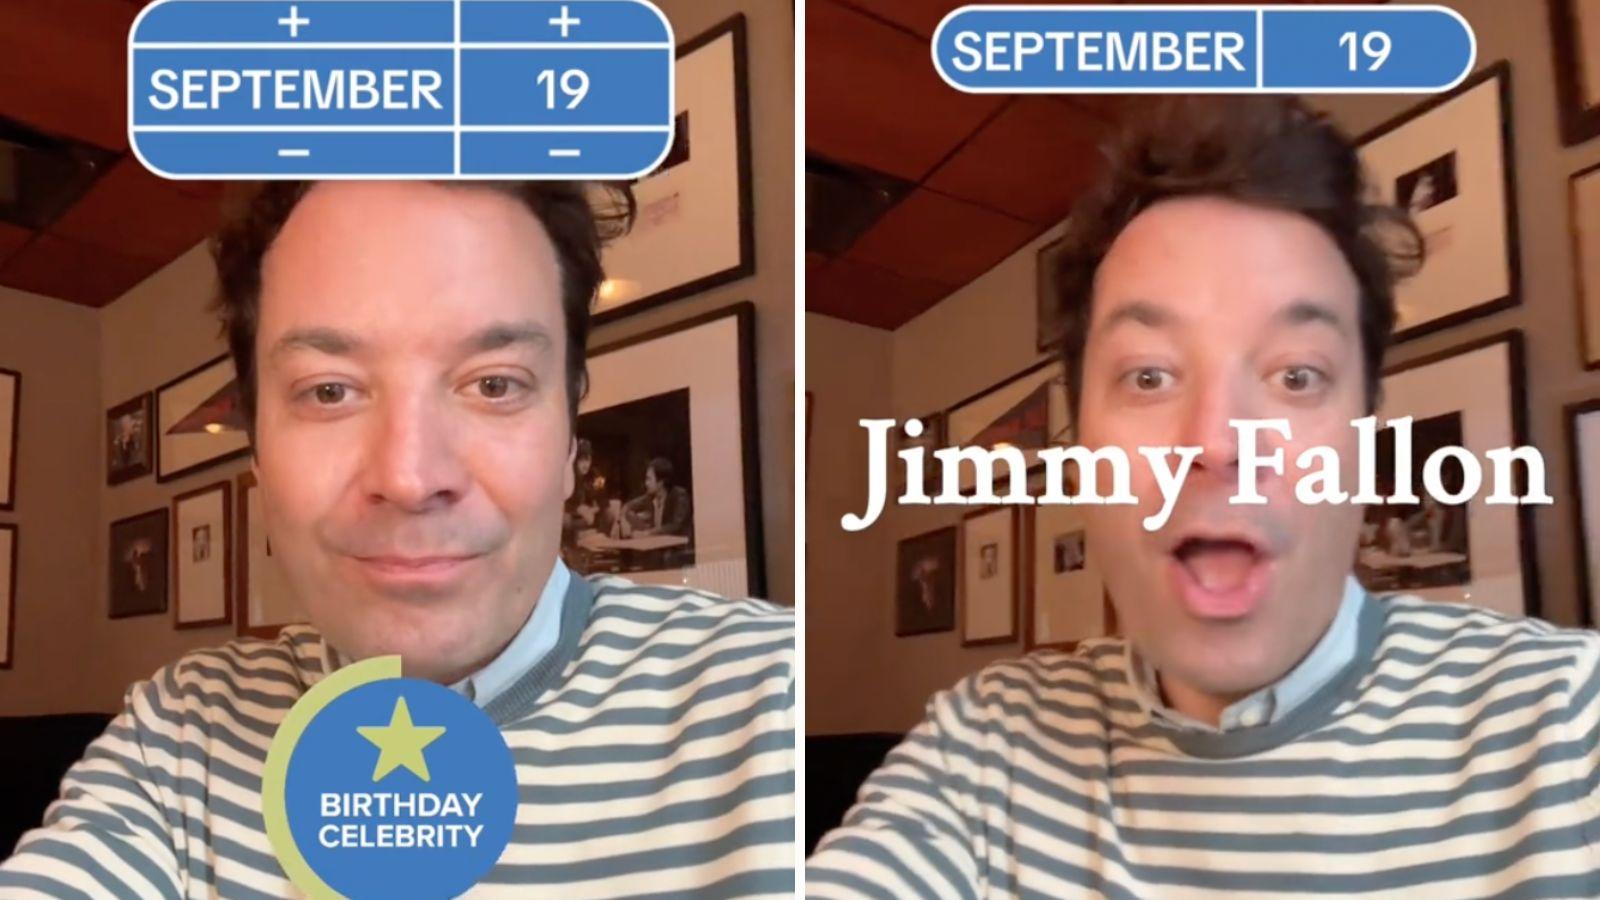 Jimmy Fallon trying out the celebrity birthday twin TikTok filter.